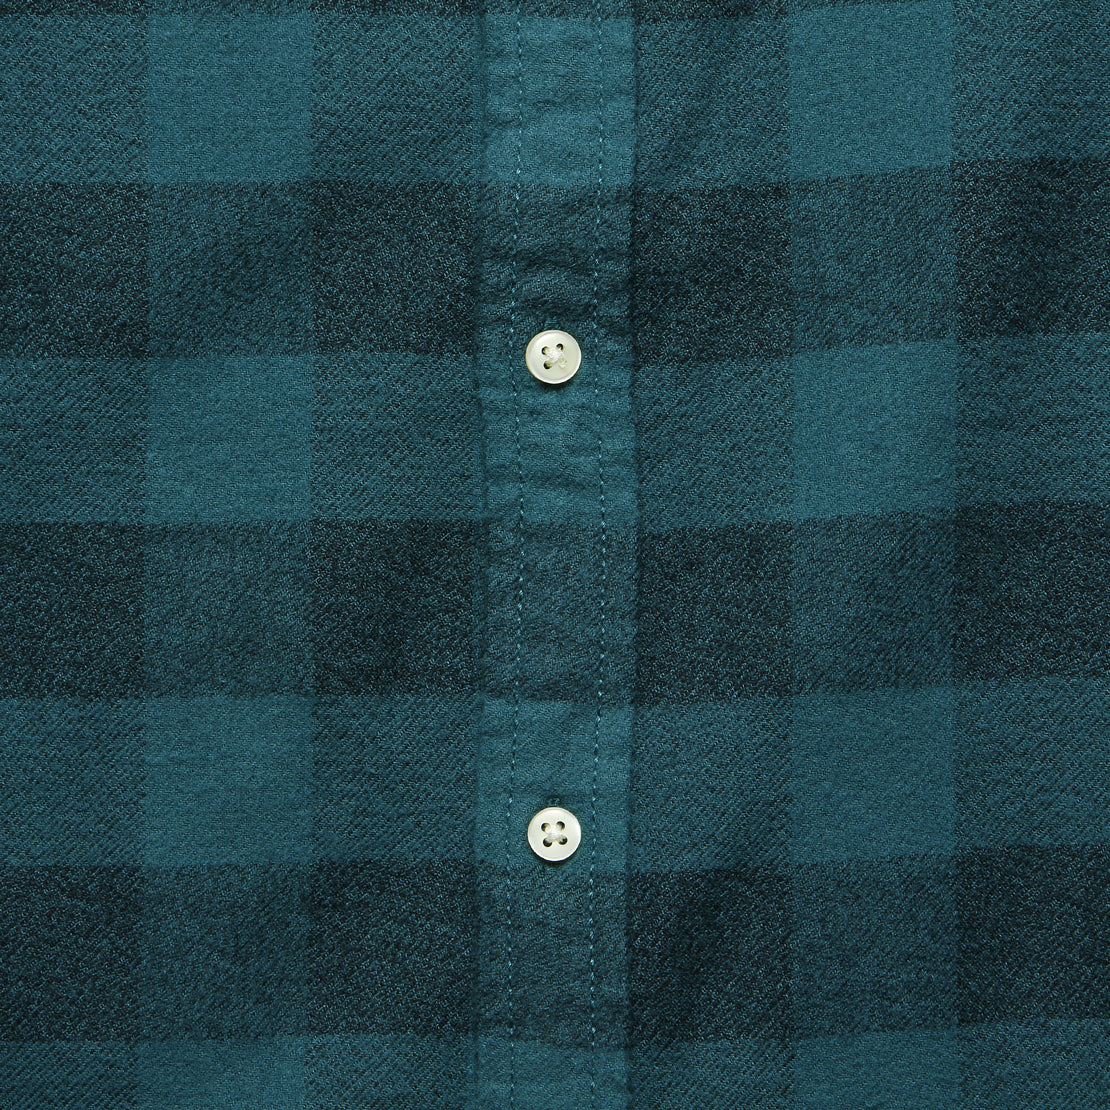 Allegheny Plaid Flannel - Comet Teal - Life After Denim - STAG Provisions - Tops - L/S Woven - Plaid